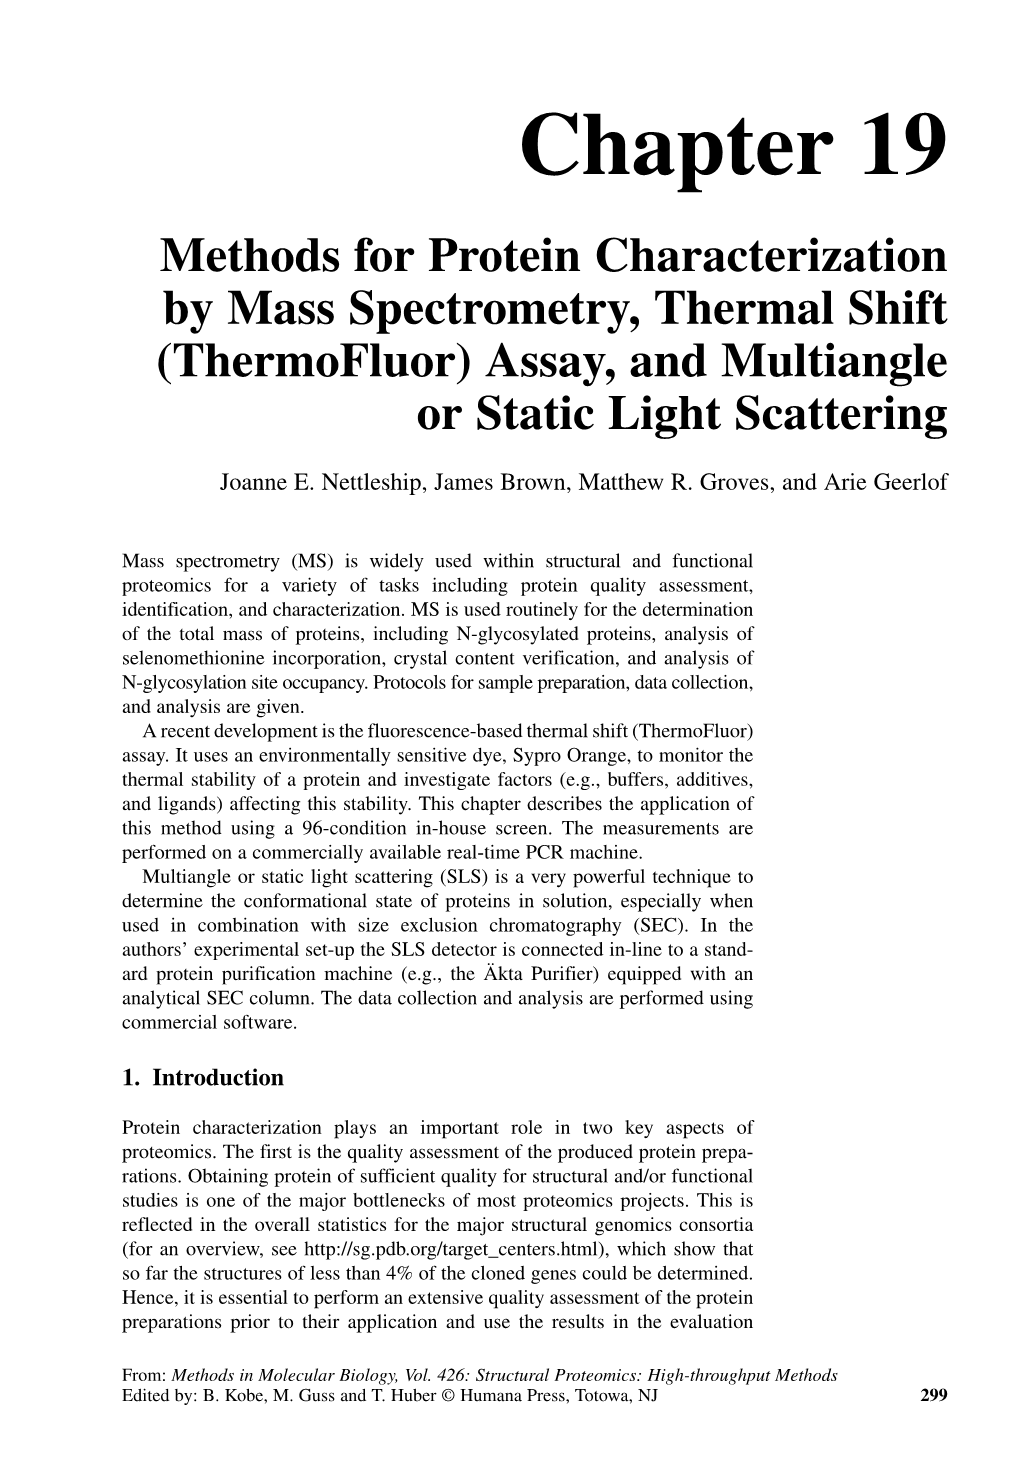 Chapter 19 Methods for Protein Characterization by Mass Spectrometry, Thermal Shift (Thermofluor) Assay, and Multiangle Or Static Light Scattering